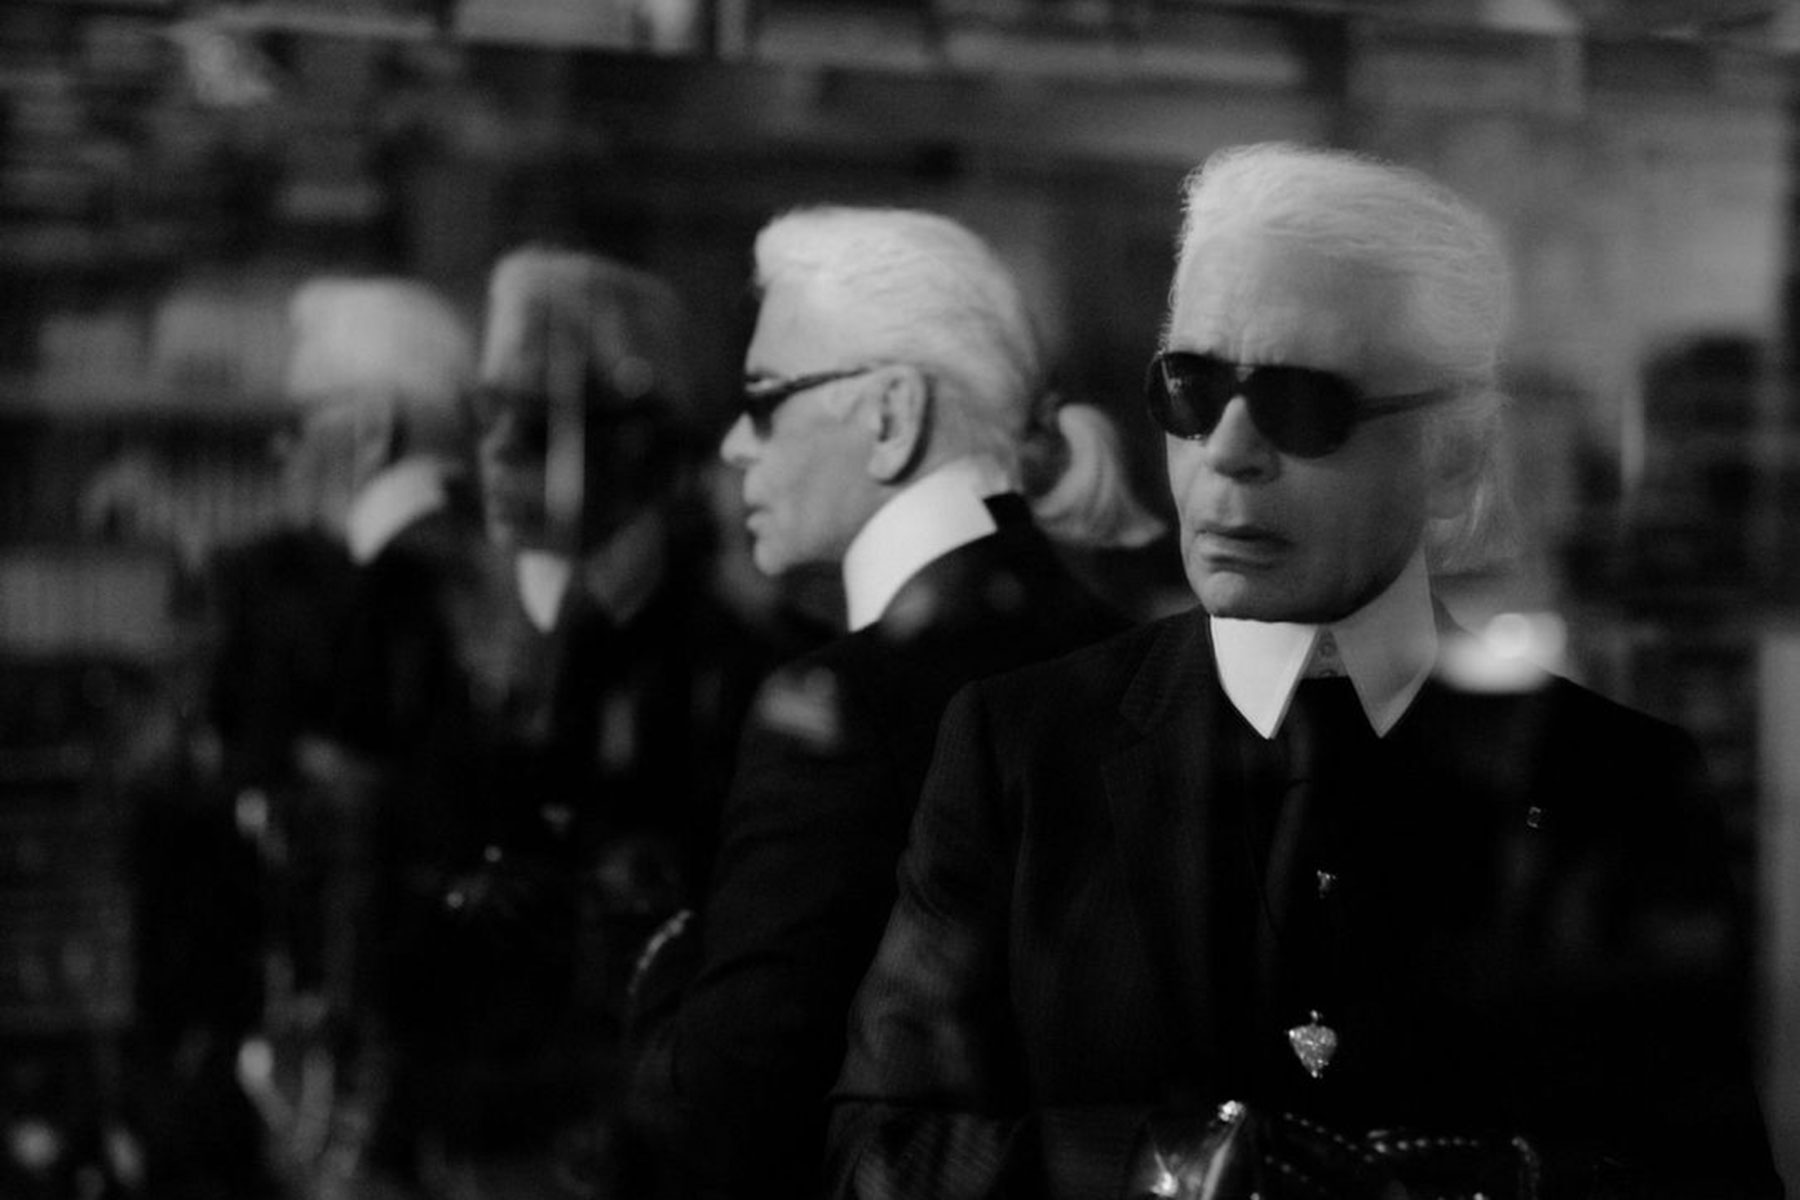 How can we celebrate the art of Karl Lagerfeld – who said such